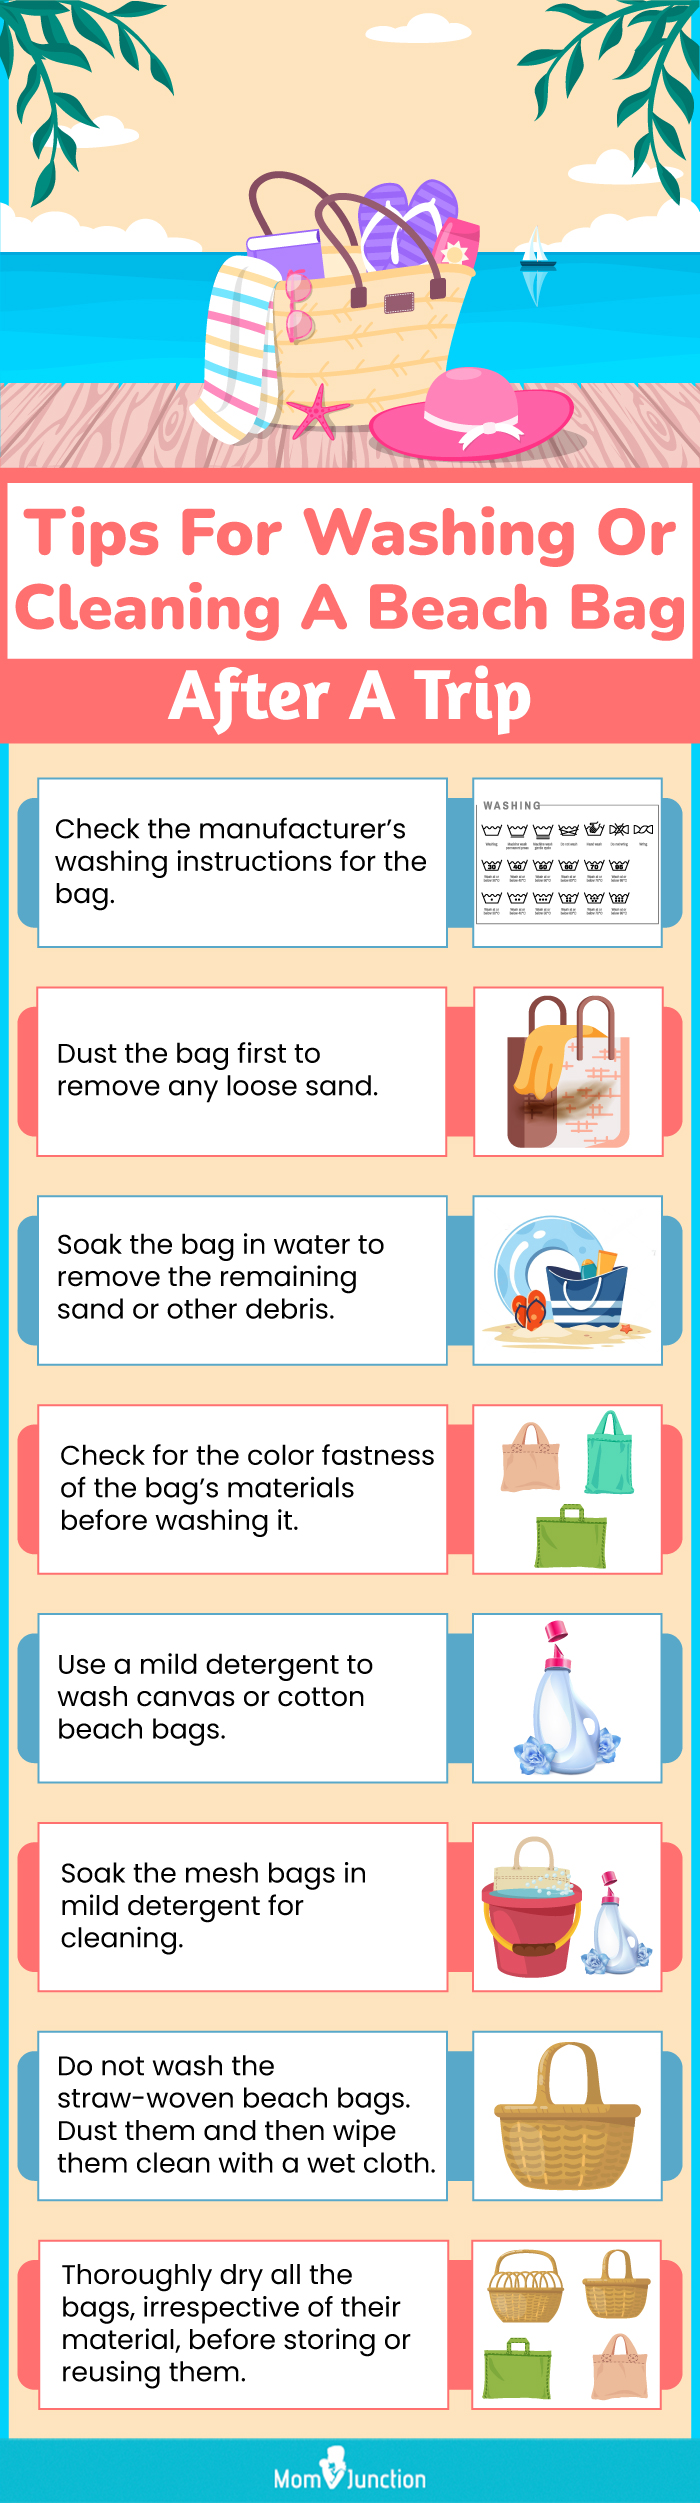 Tips For Washing Or Cleaning A Beach Bag After A Trip (infographic)